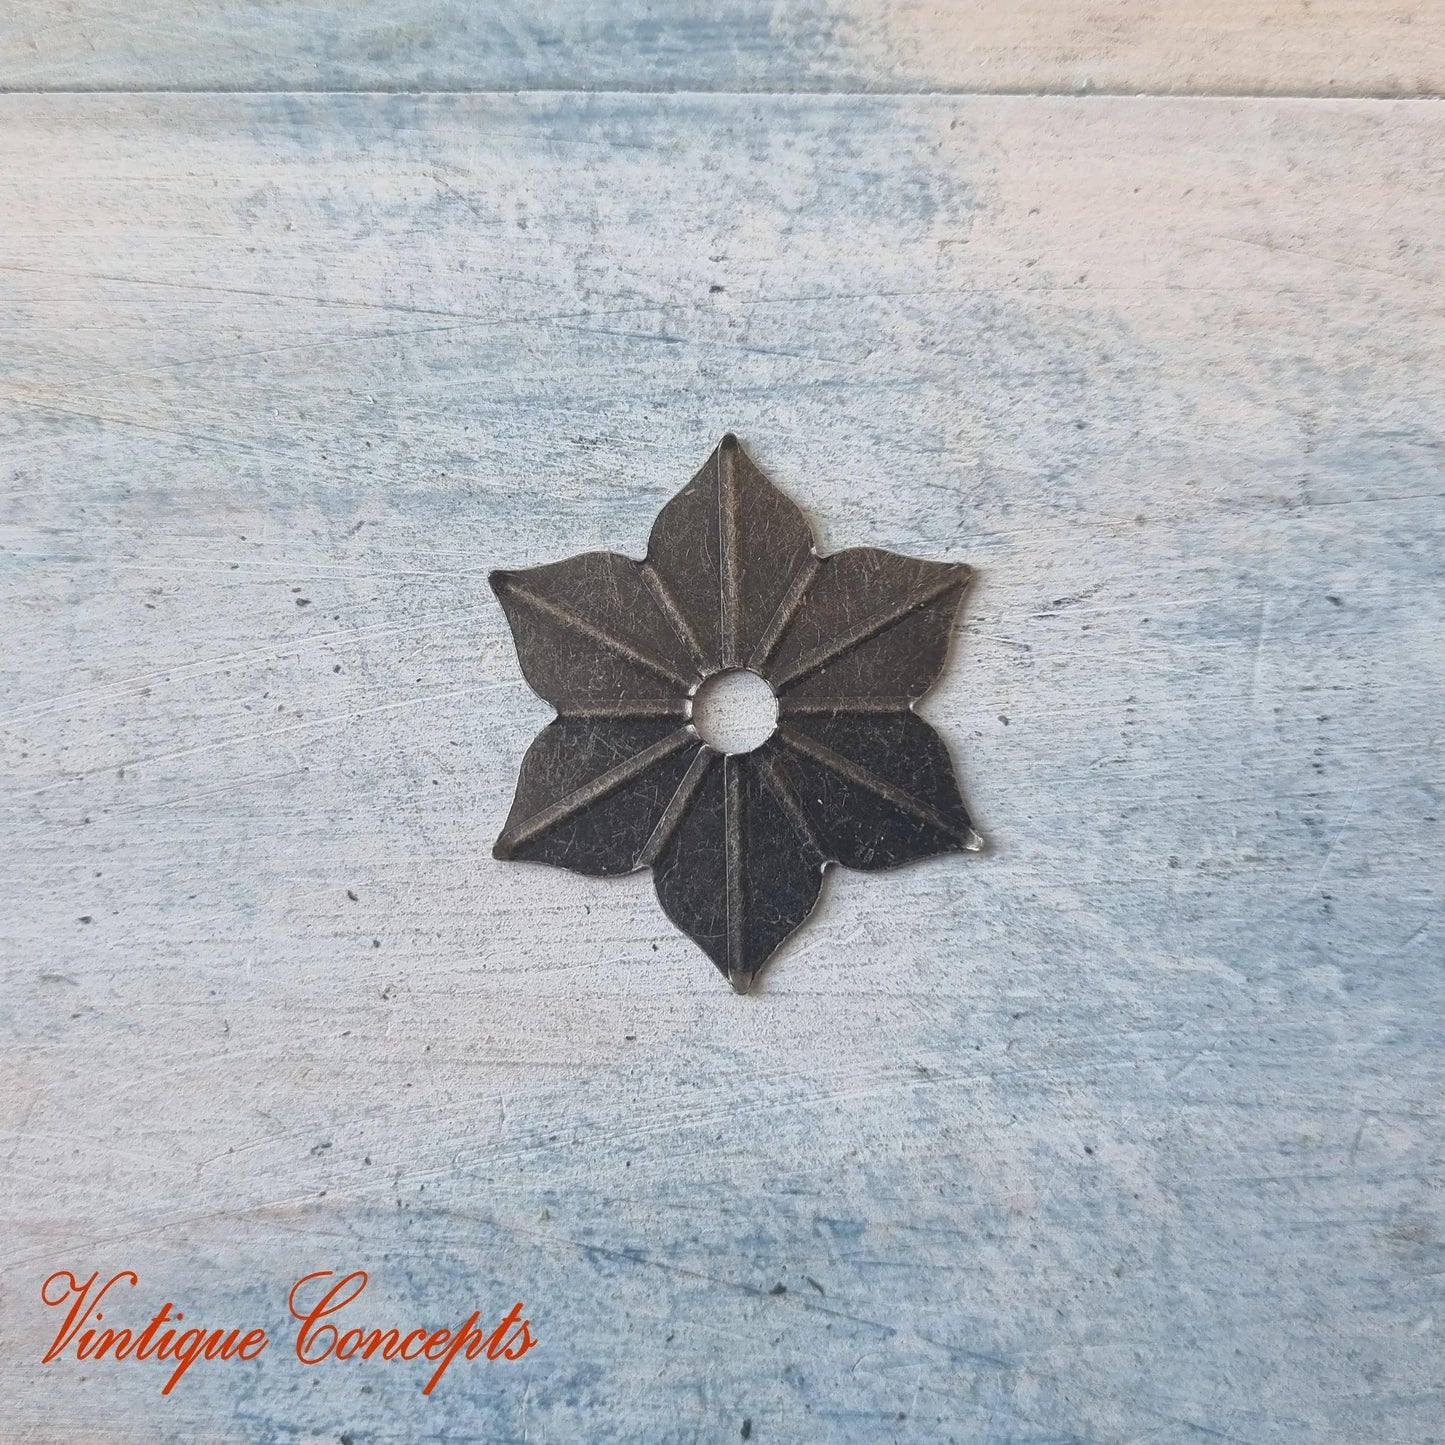 Bronze flower cover plate or washer for drawer knob 35mm dia - Vintique Concepts